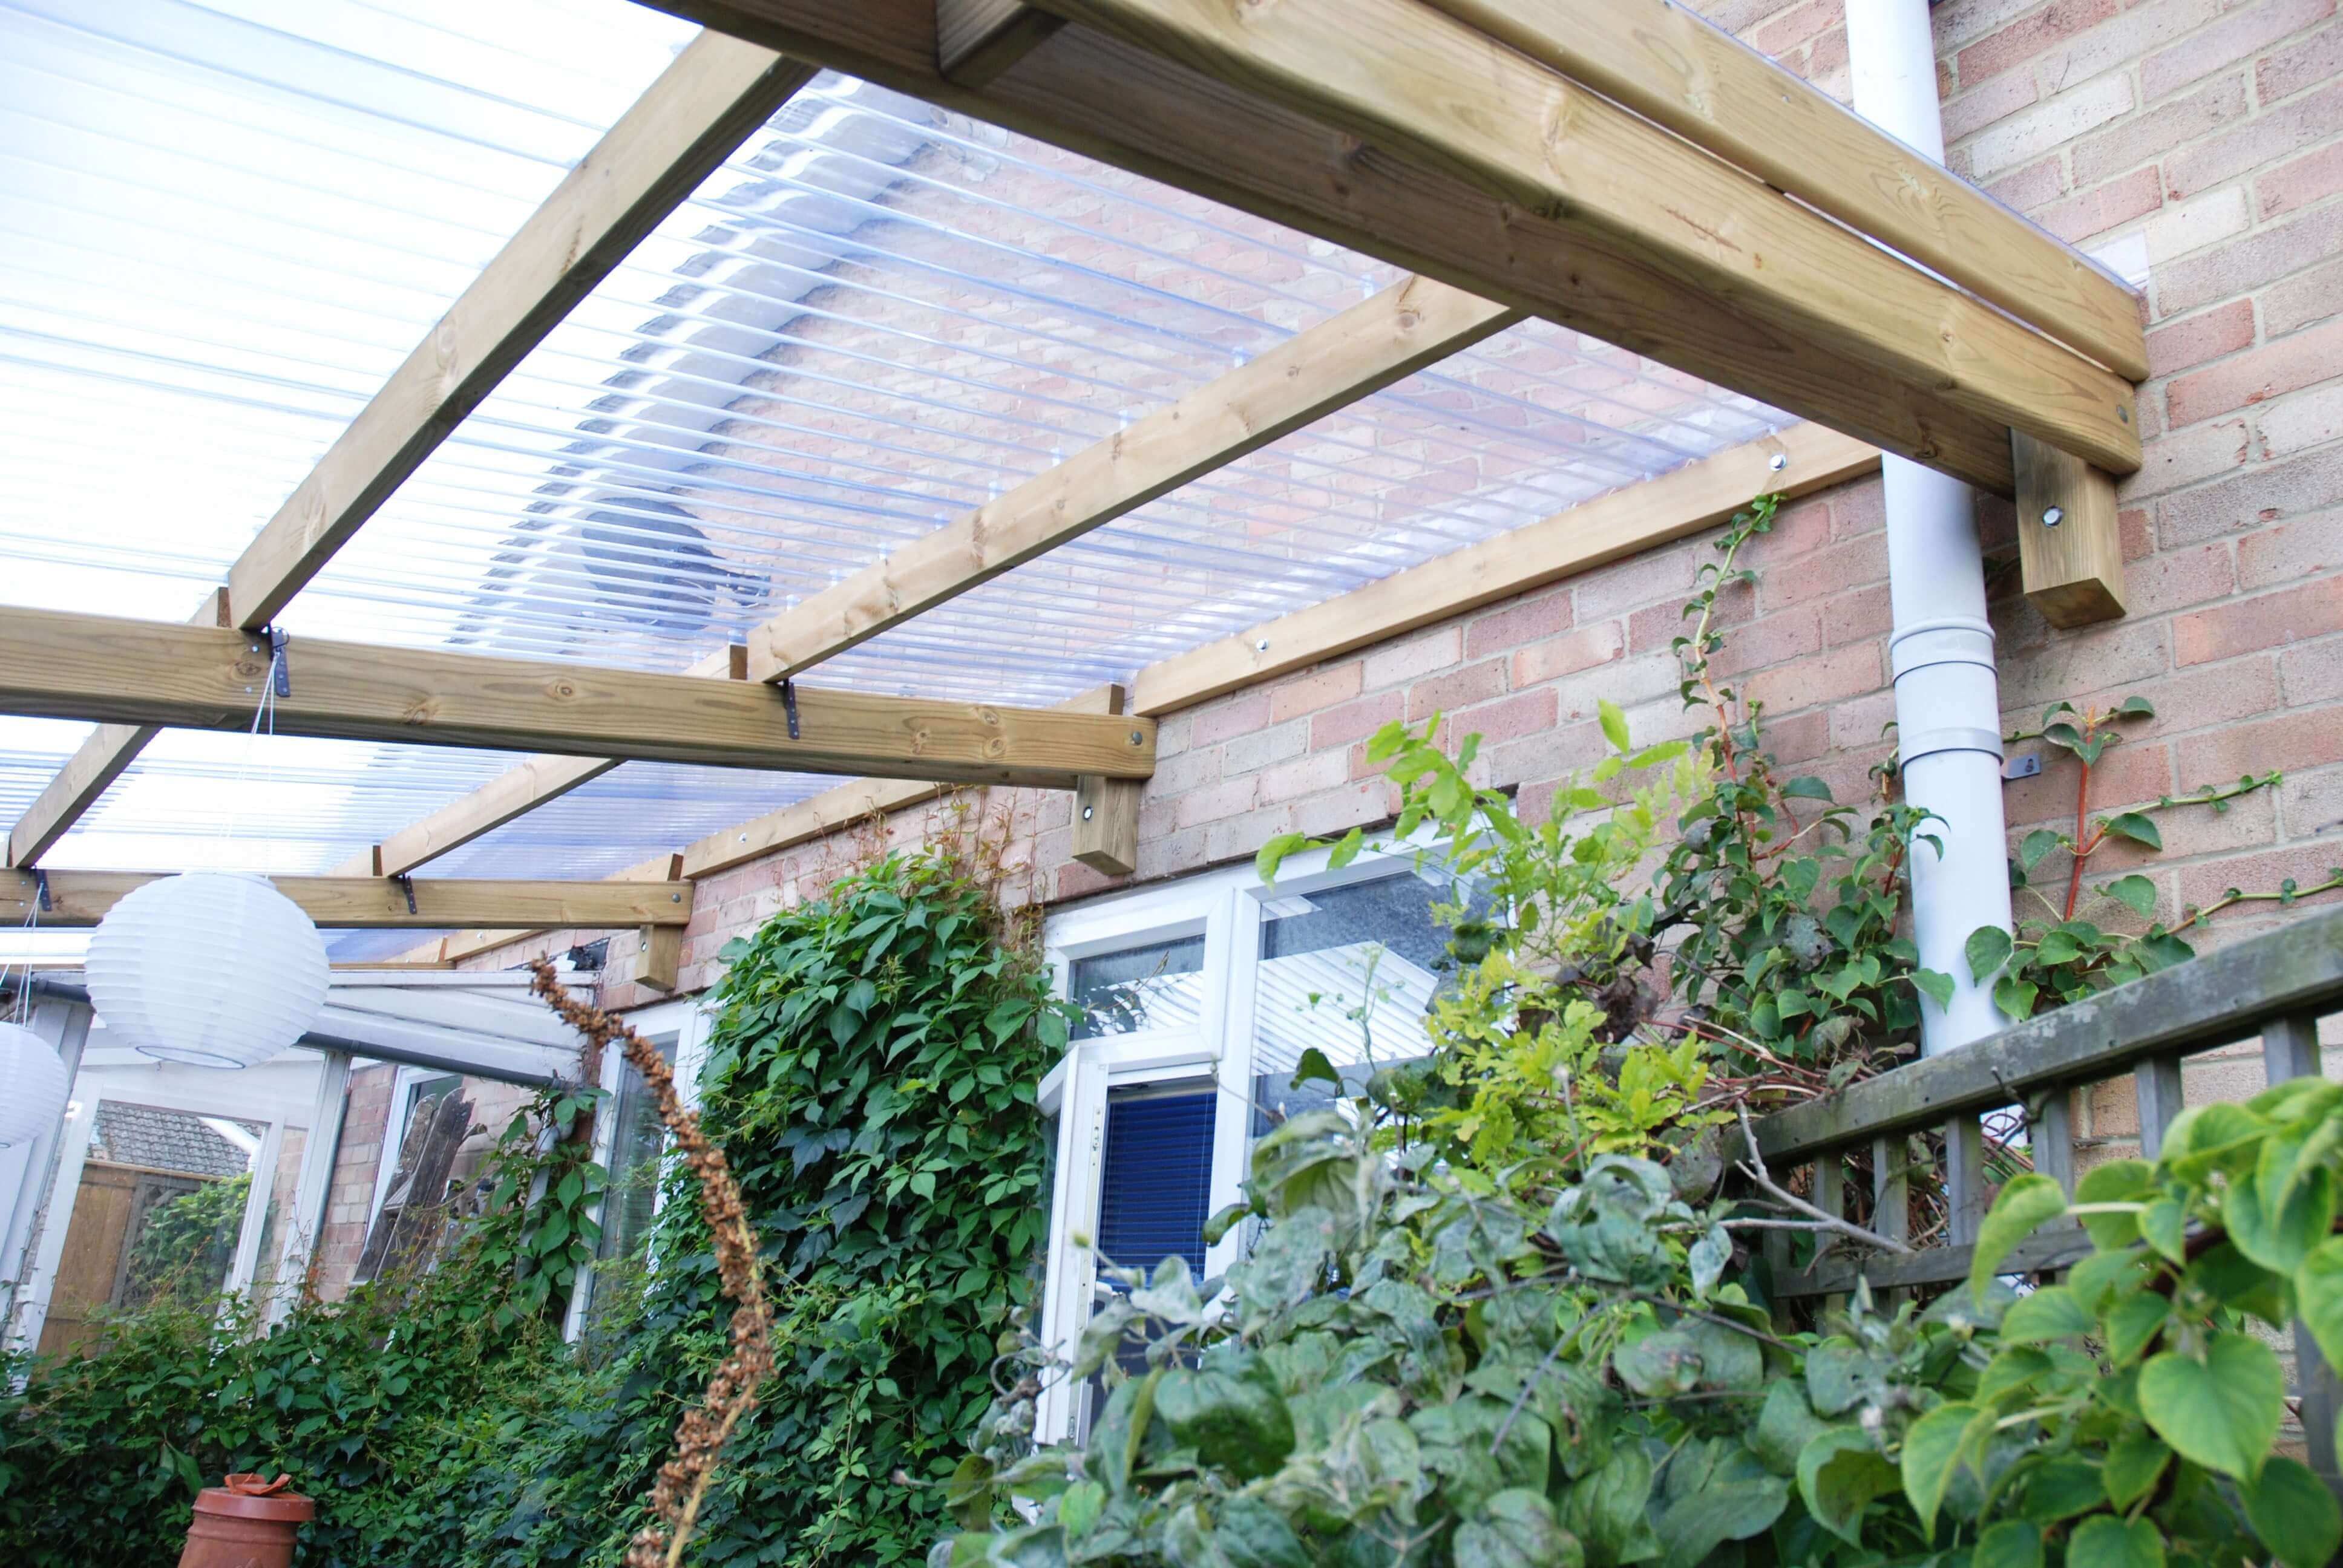 Pergola parts with plastic roof covering